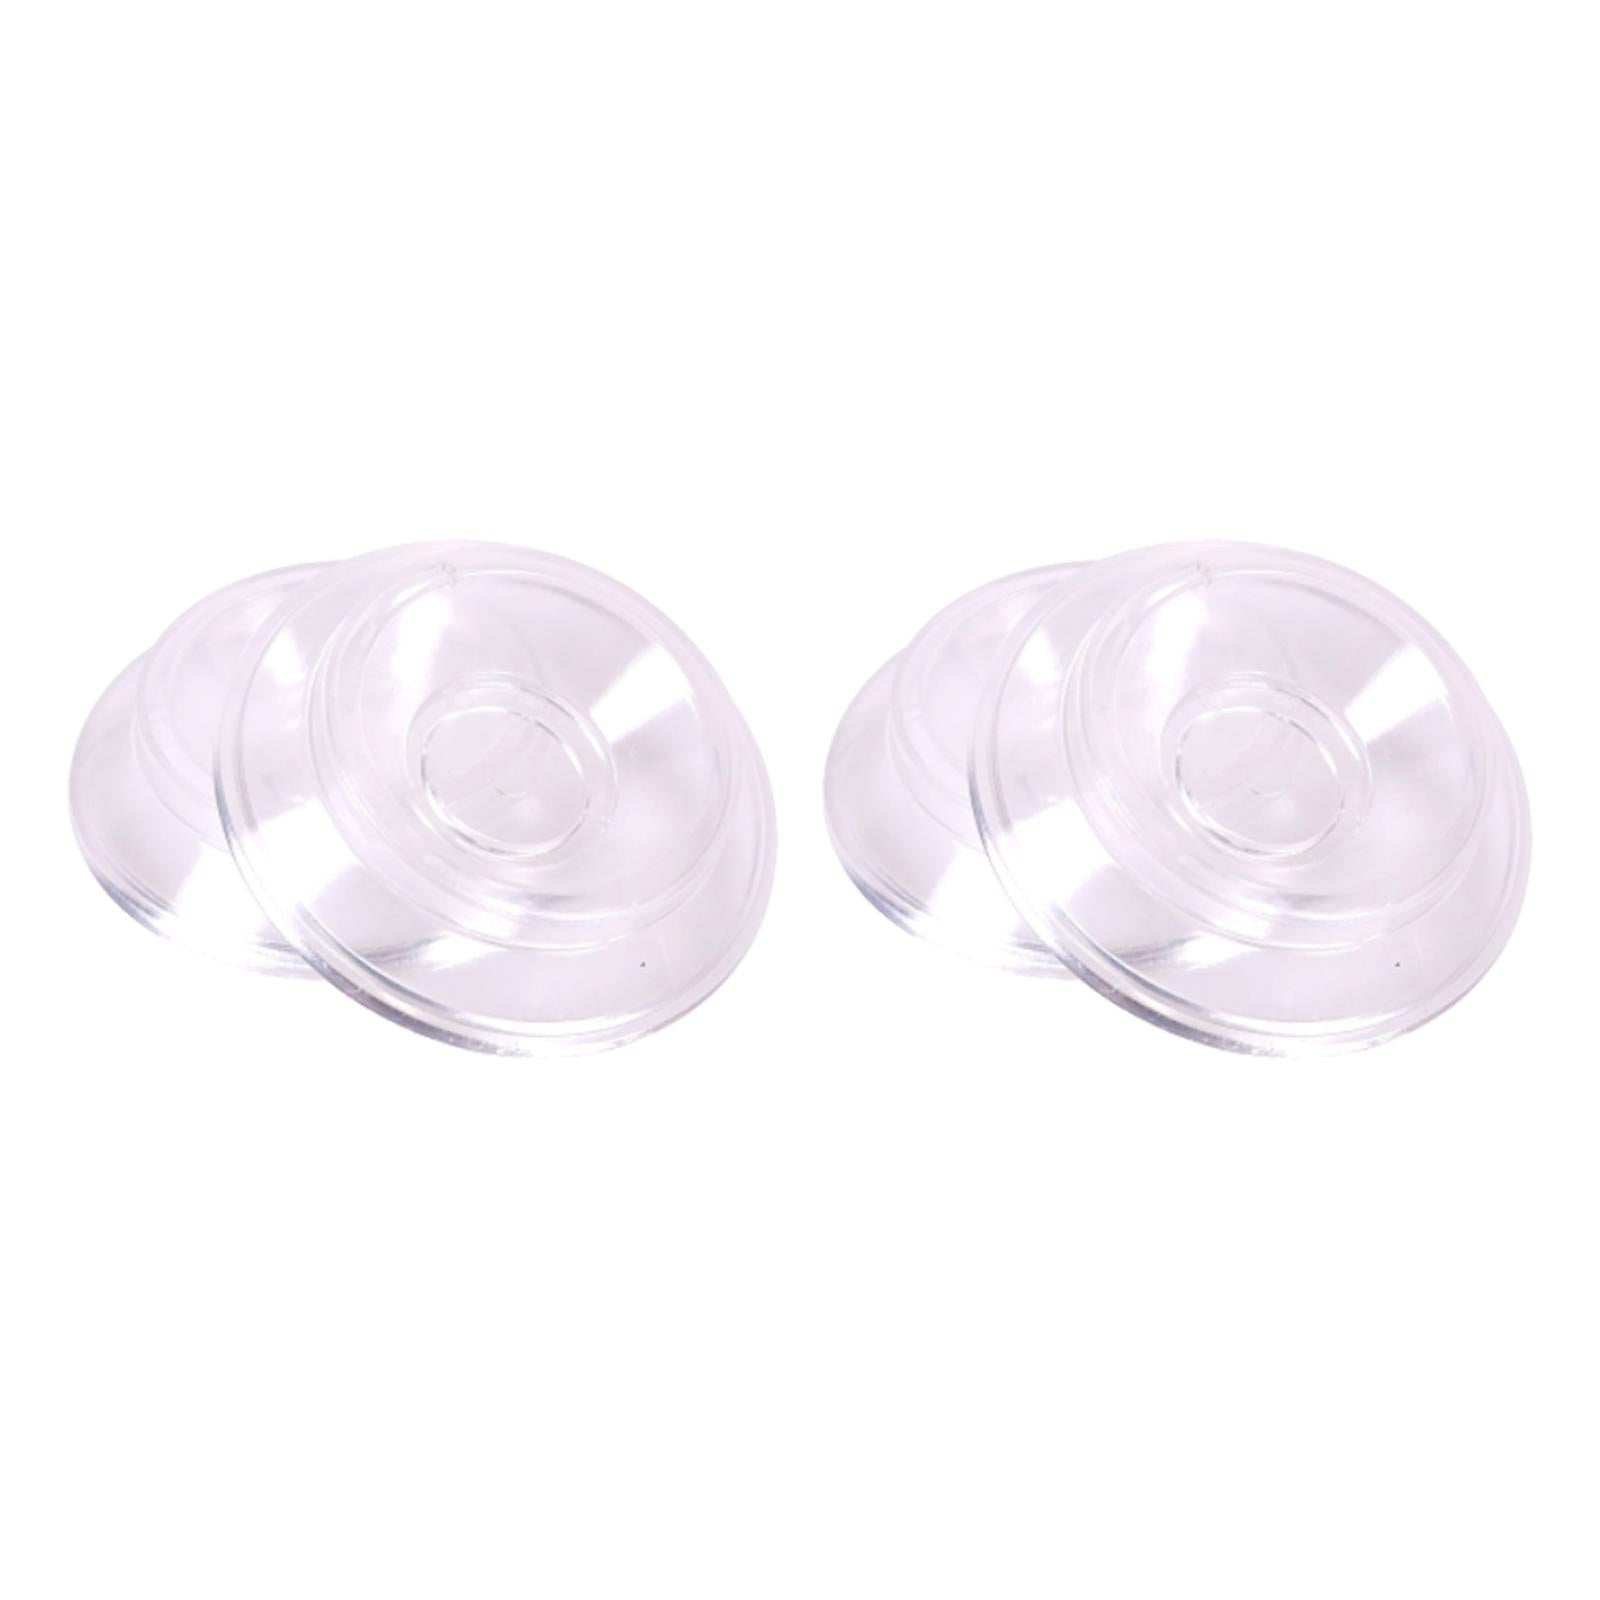 4x Piano Caster Cups High Quality Protection Solid Upright Premium ABS Clear